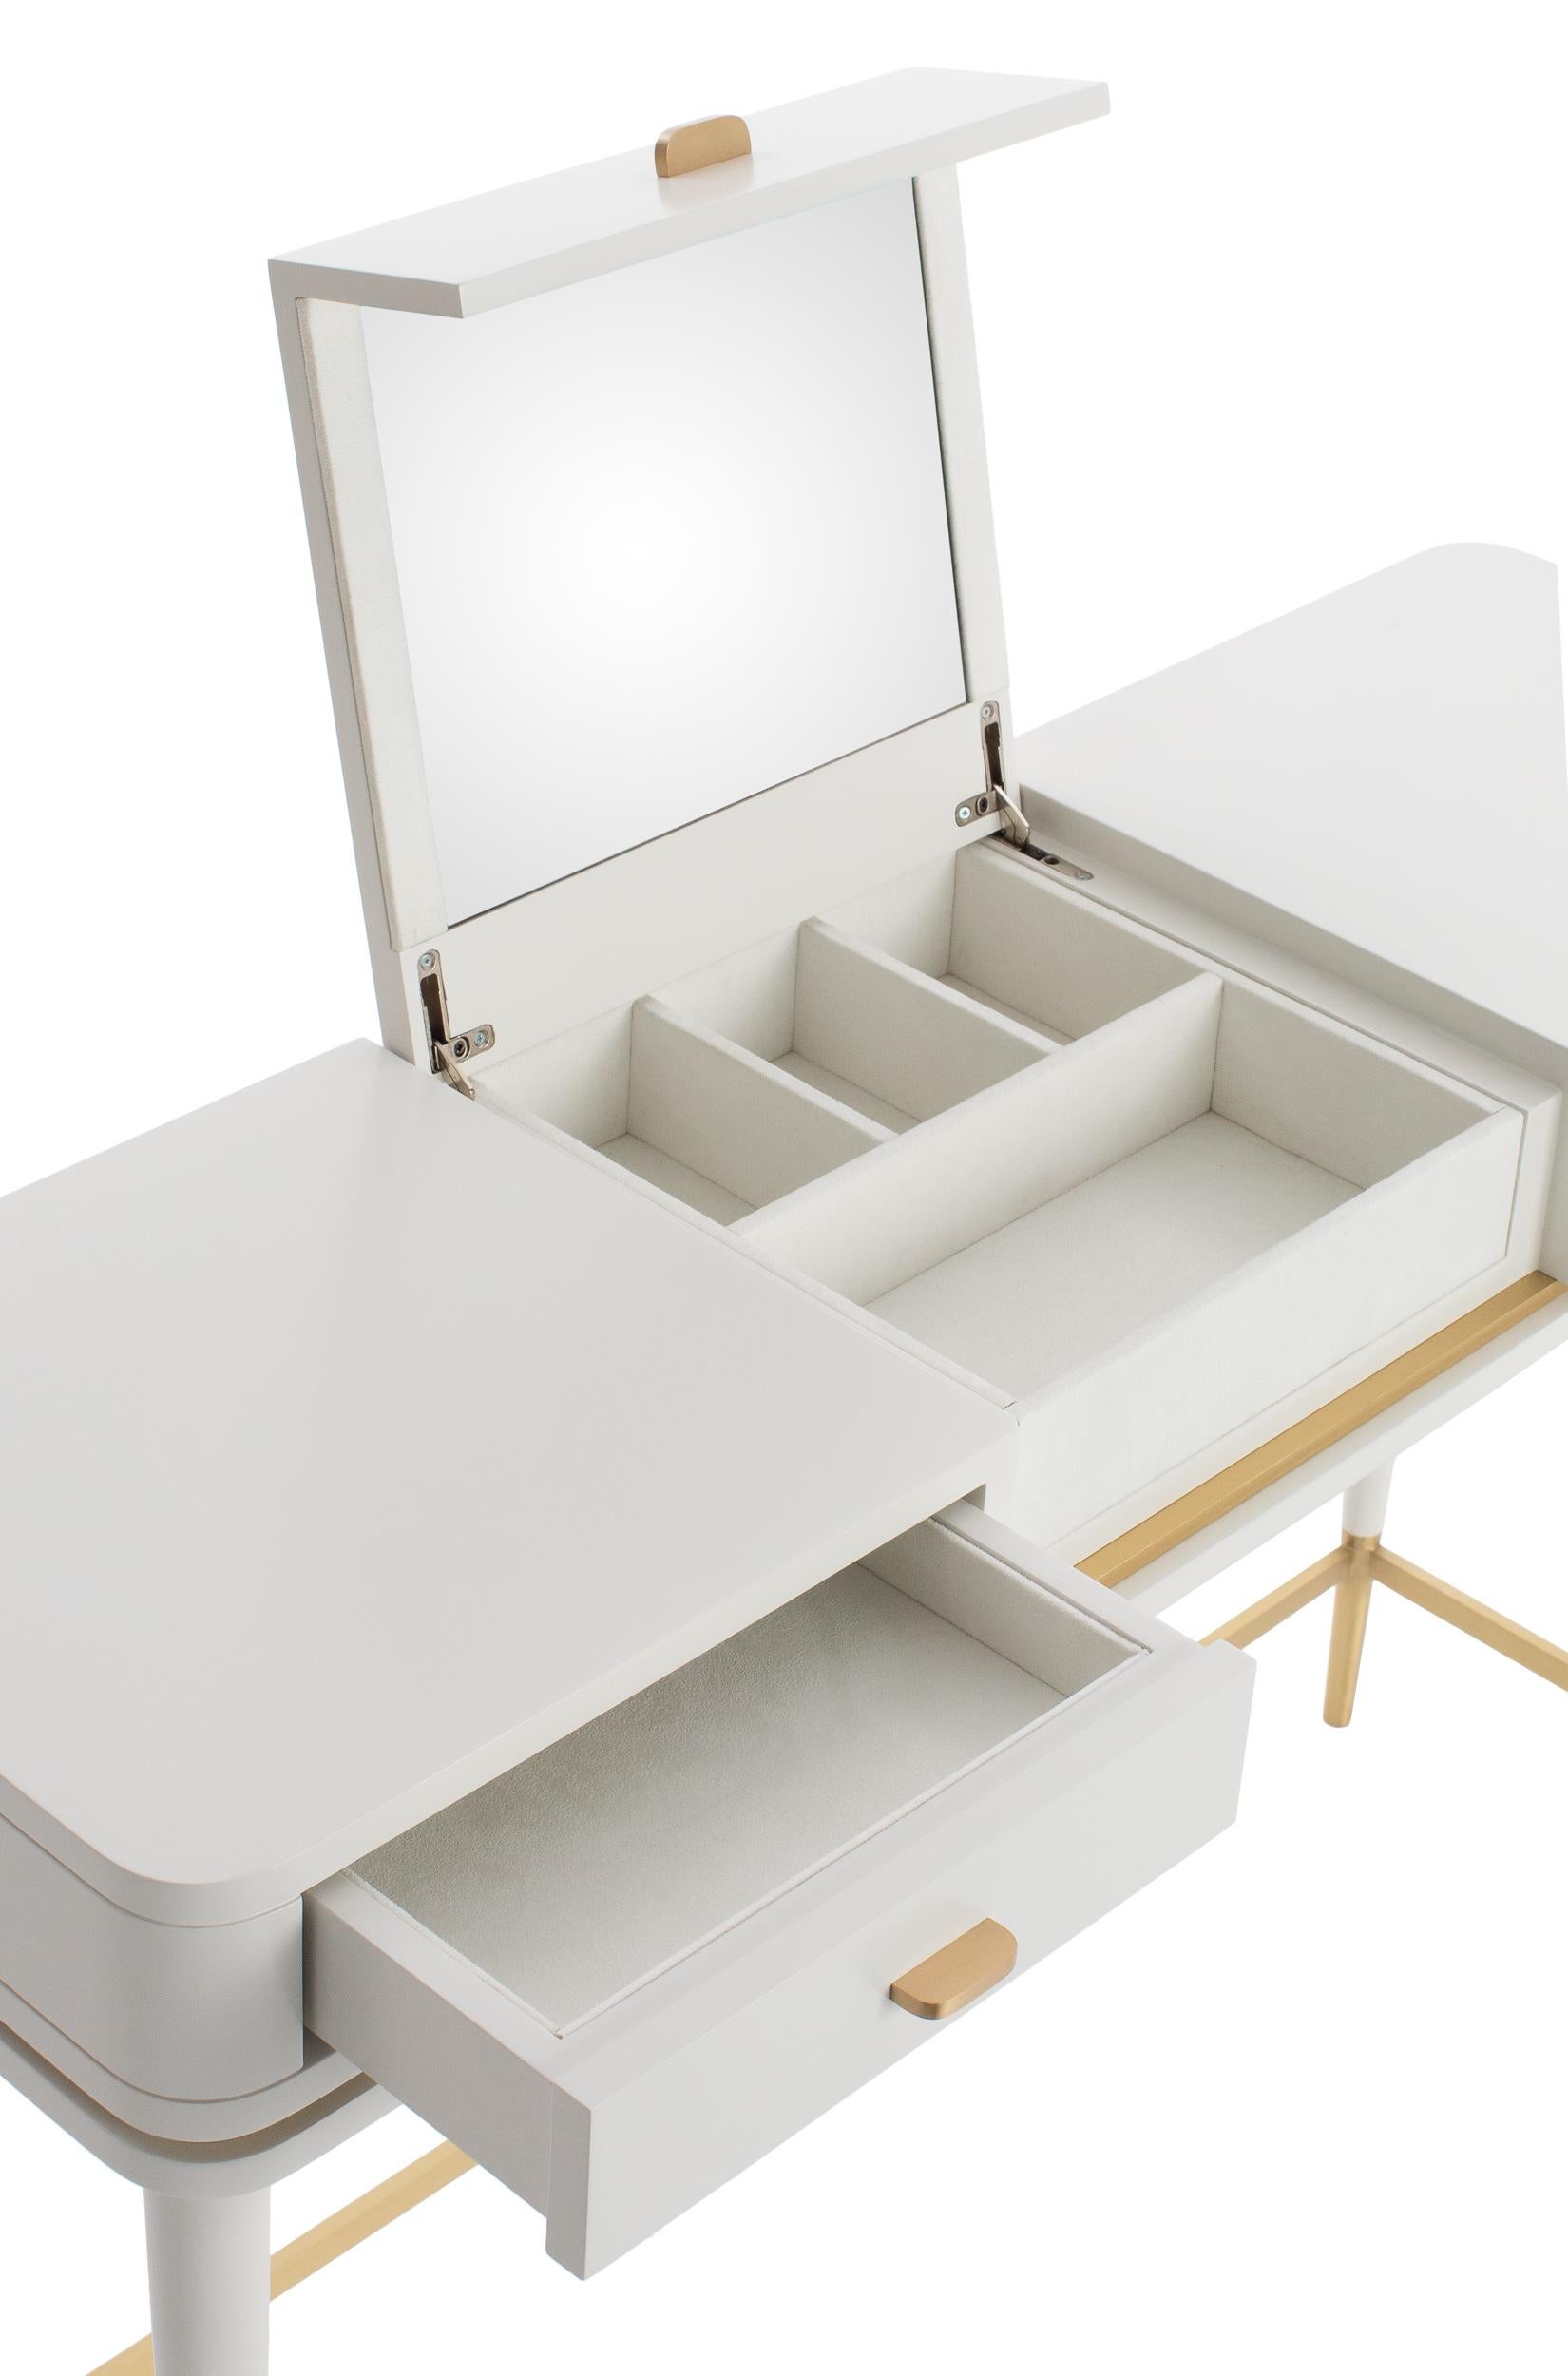 CRIS dressing table is a very elegant piece that suits perfectly in both classic and modern bedrooms.‎ Made of lacquered wood with details in metal, antique brass or stainless steel.‎ It is equipped with drawers, a mirror door and a functional